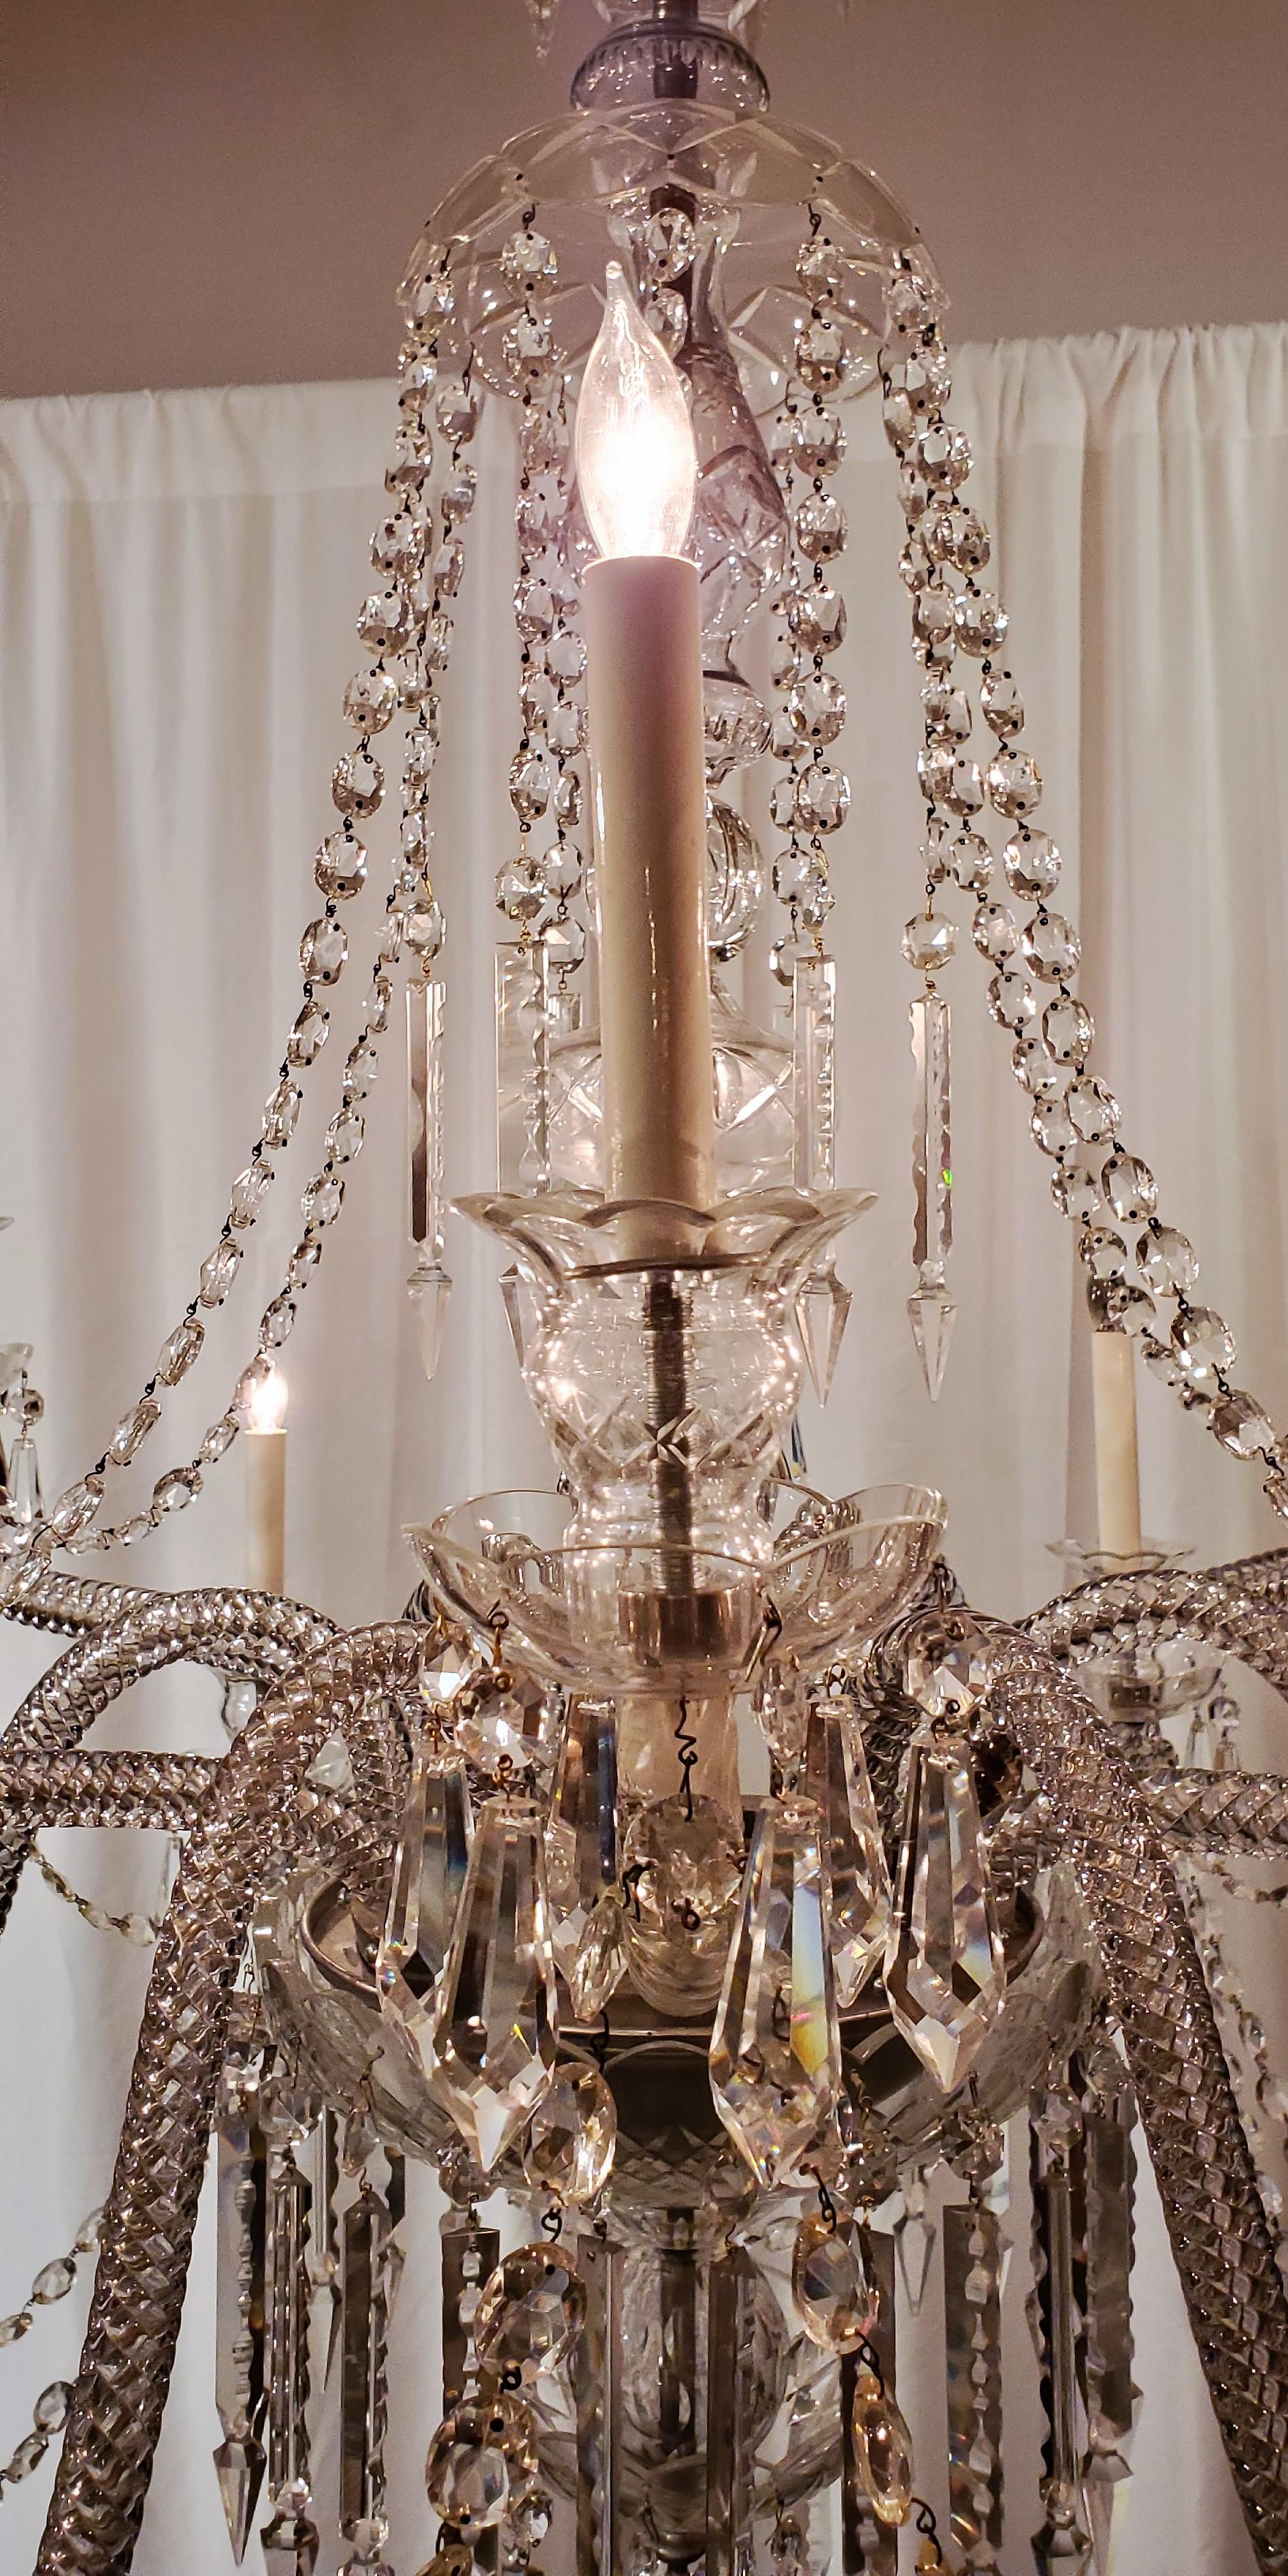 This chandelier has very elegant lines. A Classic.